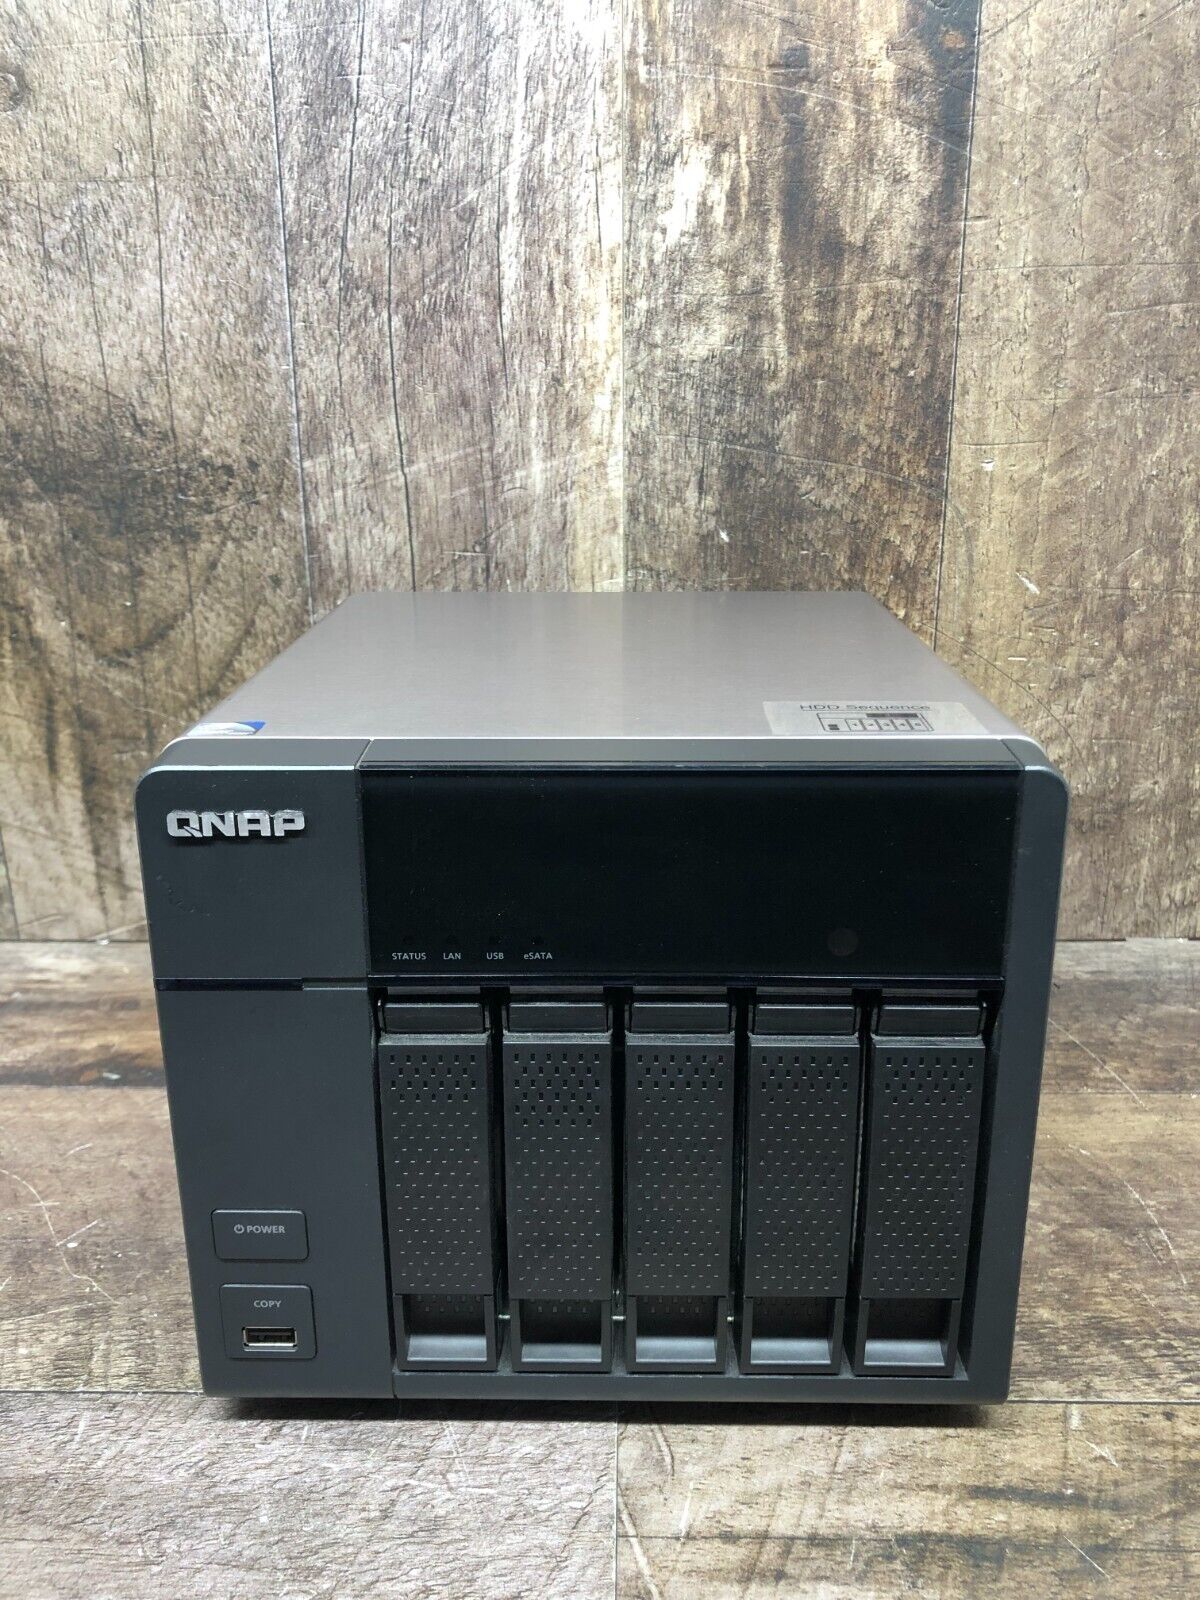 QNAP TS-569L 5 Bays 5 x 2TB Network Storage No Charger *TESTED WORKING*